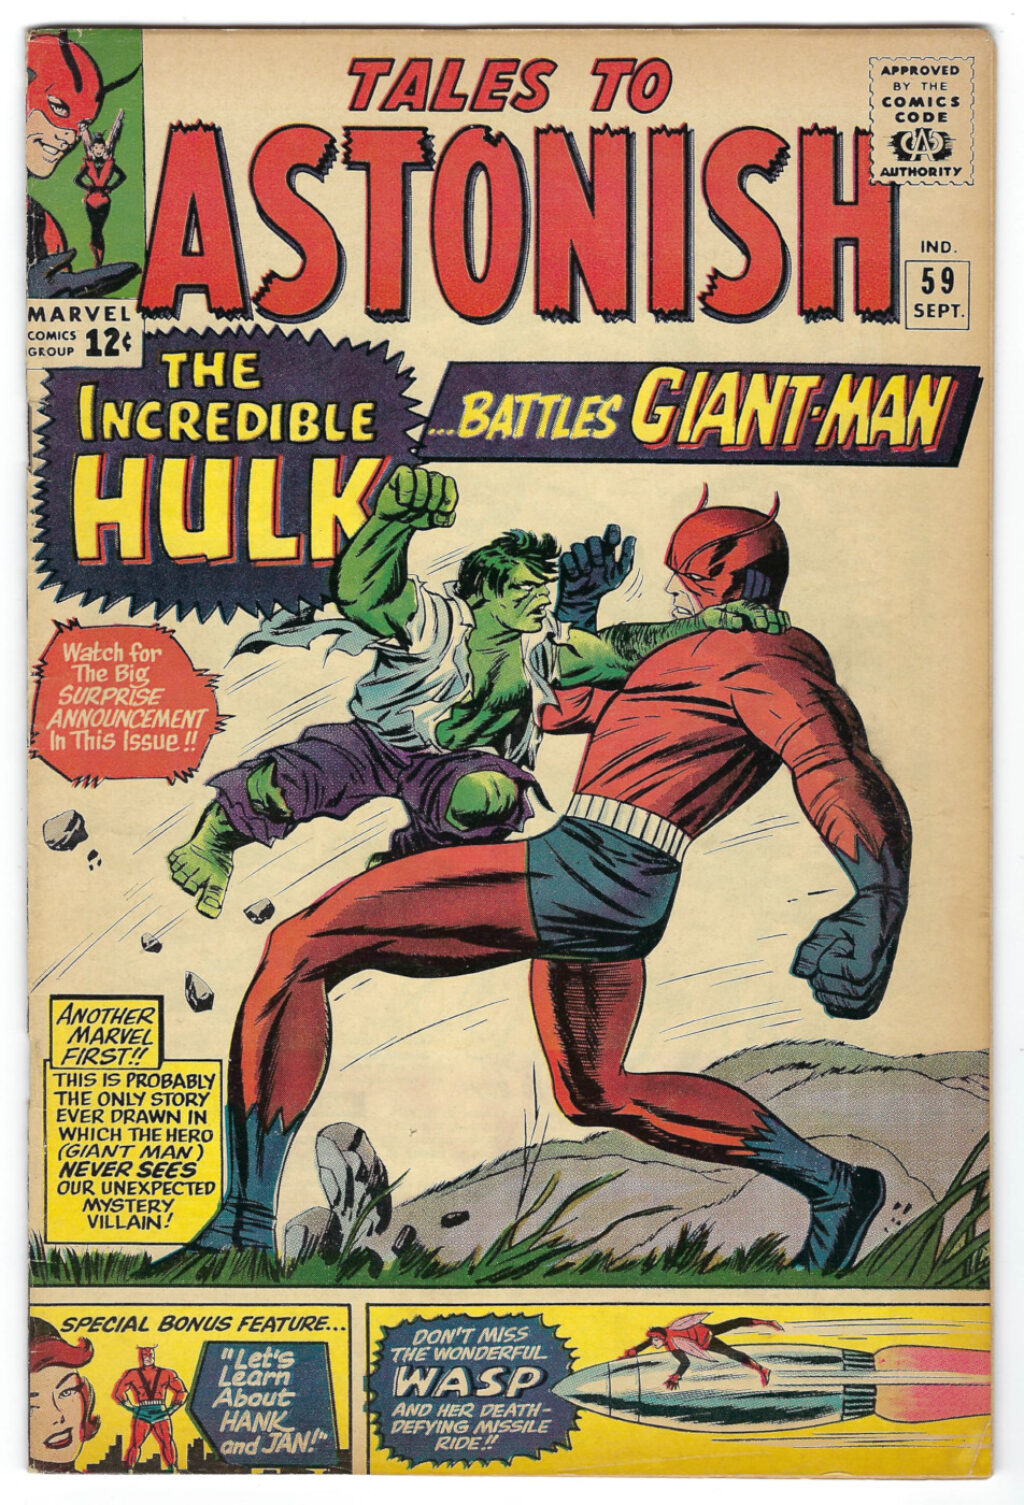 Marvel Comics Tales to Astonish (1959) #59: 1st Title Appearance of Incredible Hulk 1